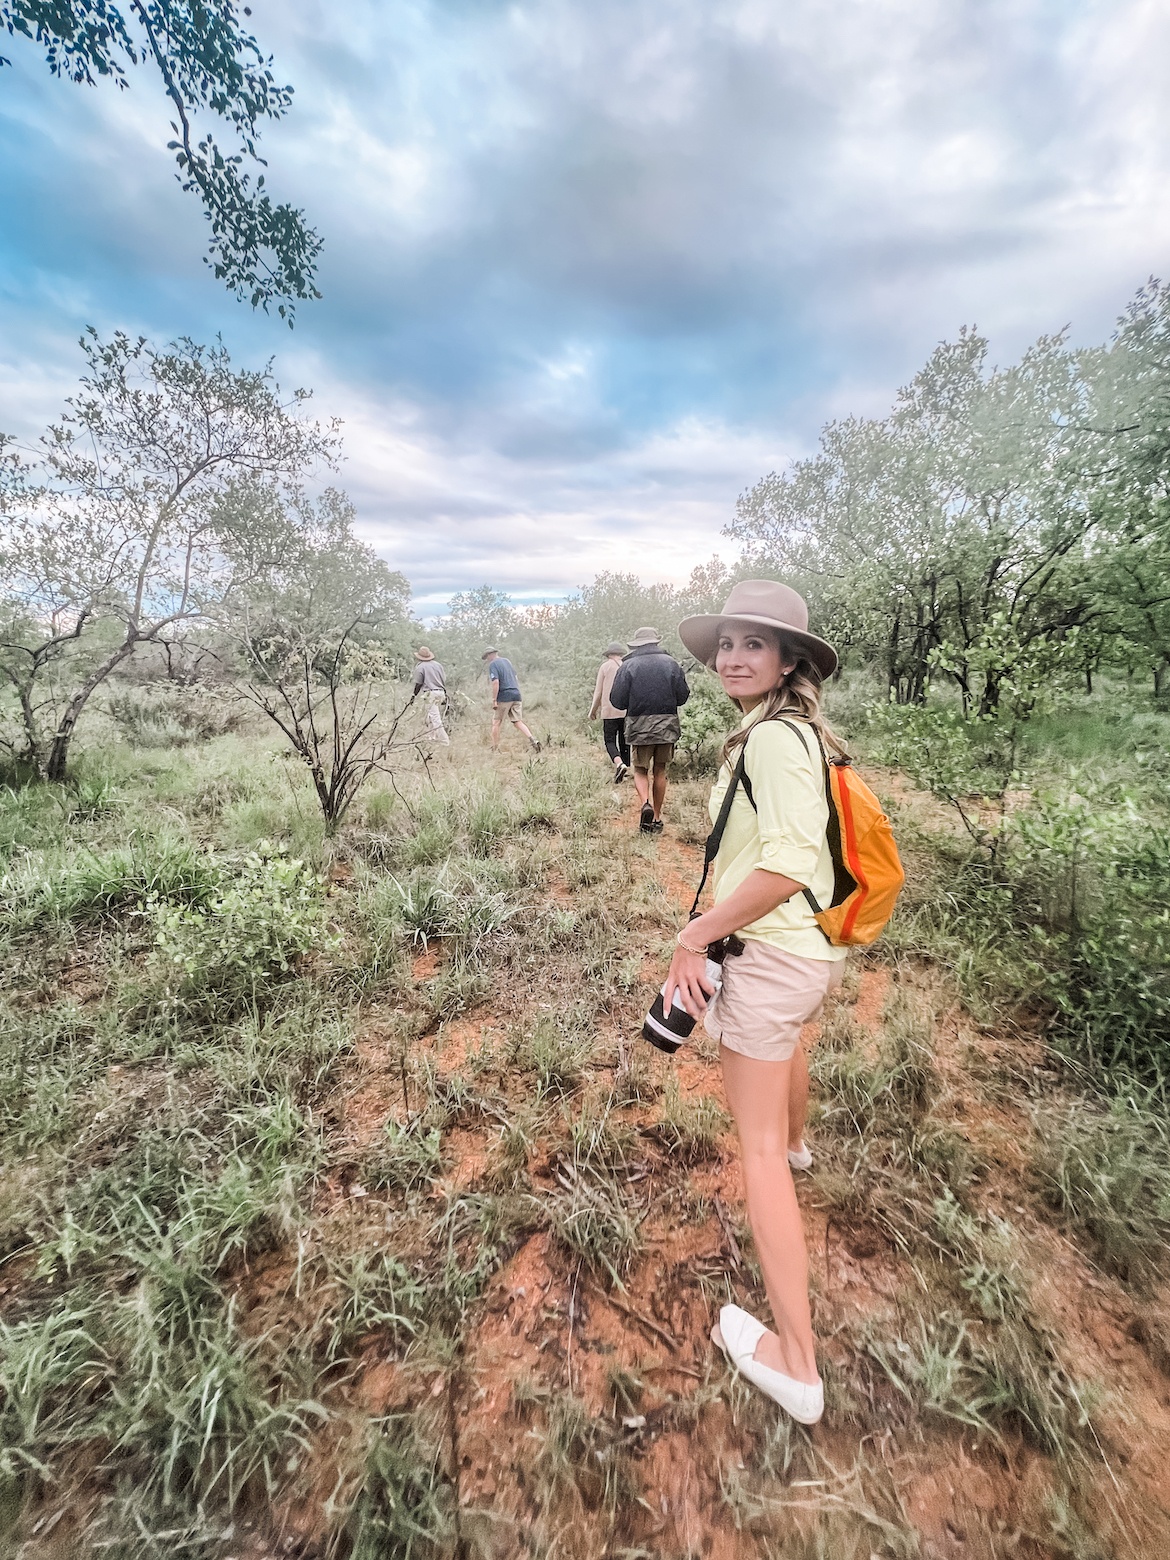 Walking to see the cheetahs in Karongwe Private Game Reserve, South Africa